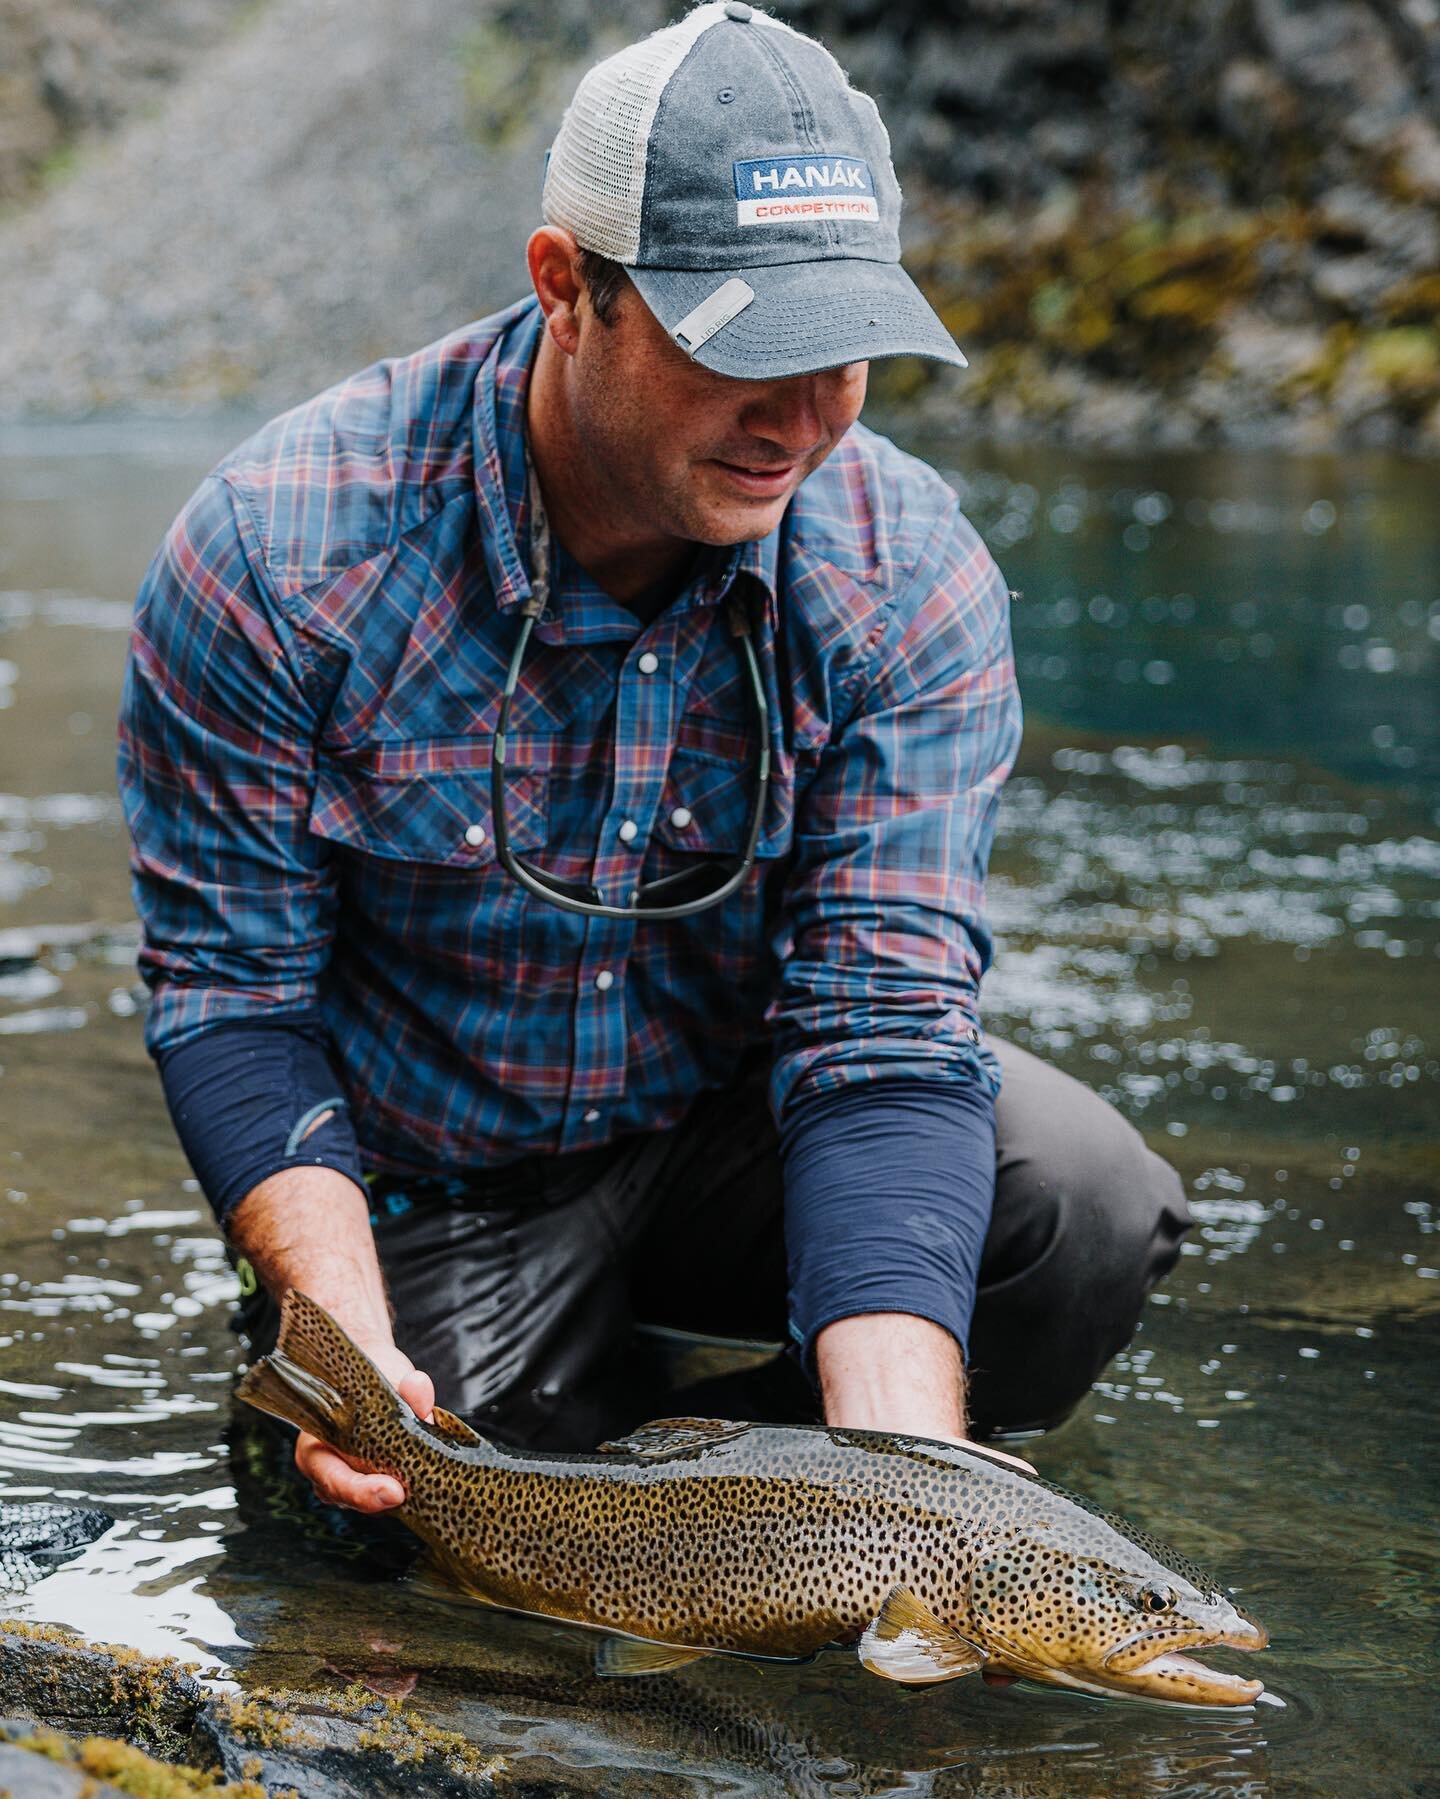 Iceland 2022&hellip;more specifically FLY FISHING in Iceland! Join me on my journey fly fishing and traveling through Iceland for two weeks (yes, 2 weeks!) this summer. Day 1: We won&rsquo;t talk about airport cancellations and delays much, but they 